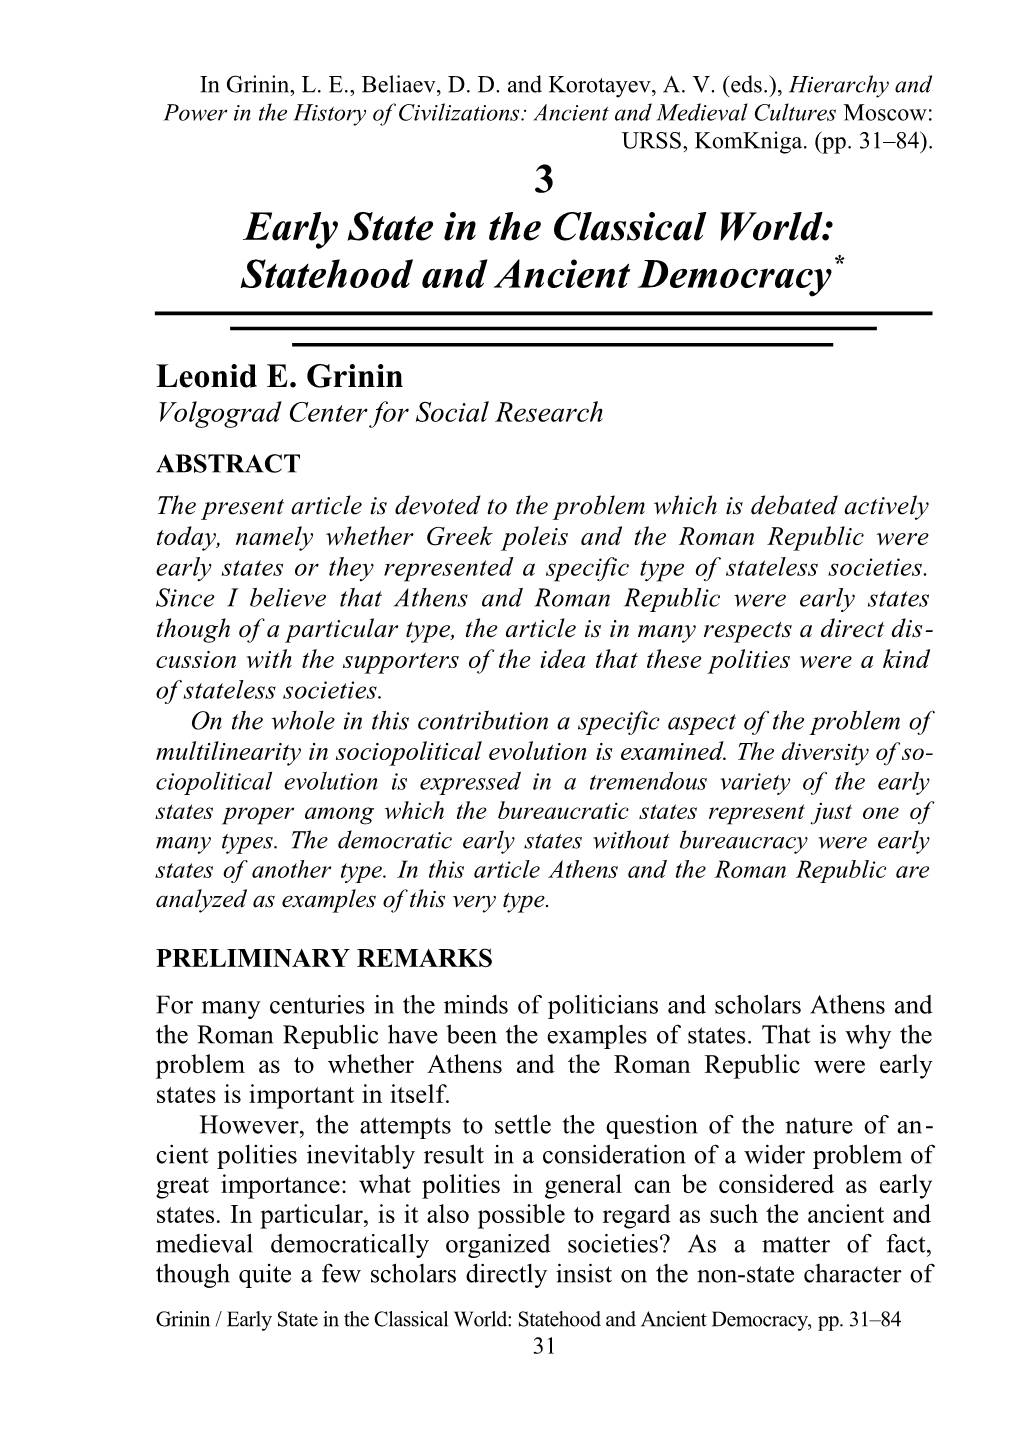 Early State in the Classical World: Statehood and Ancient Democracy*